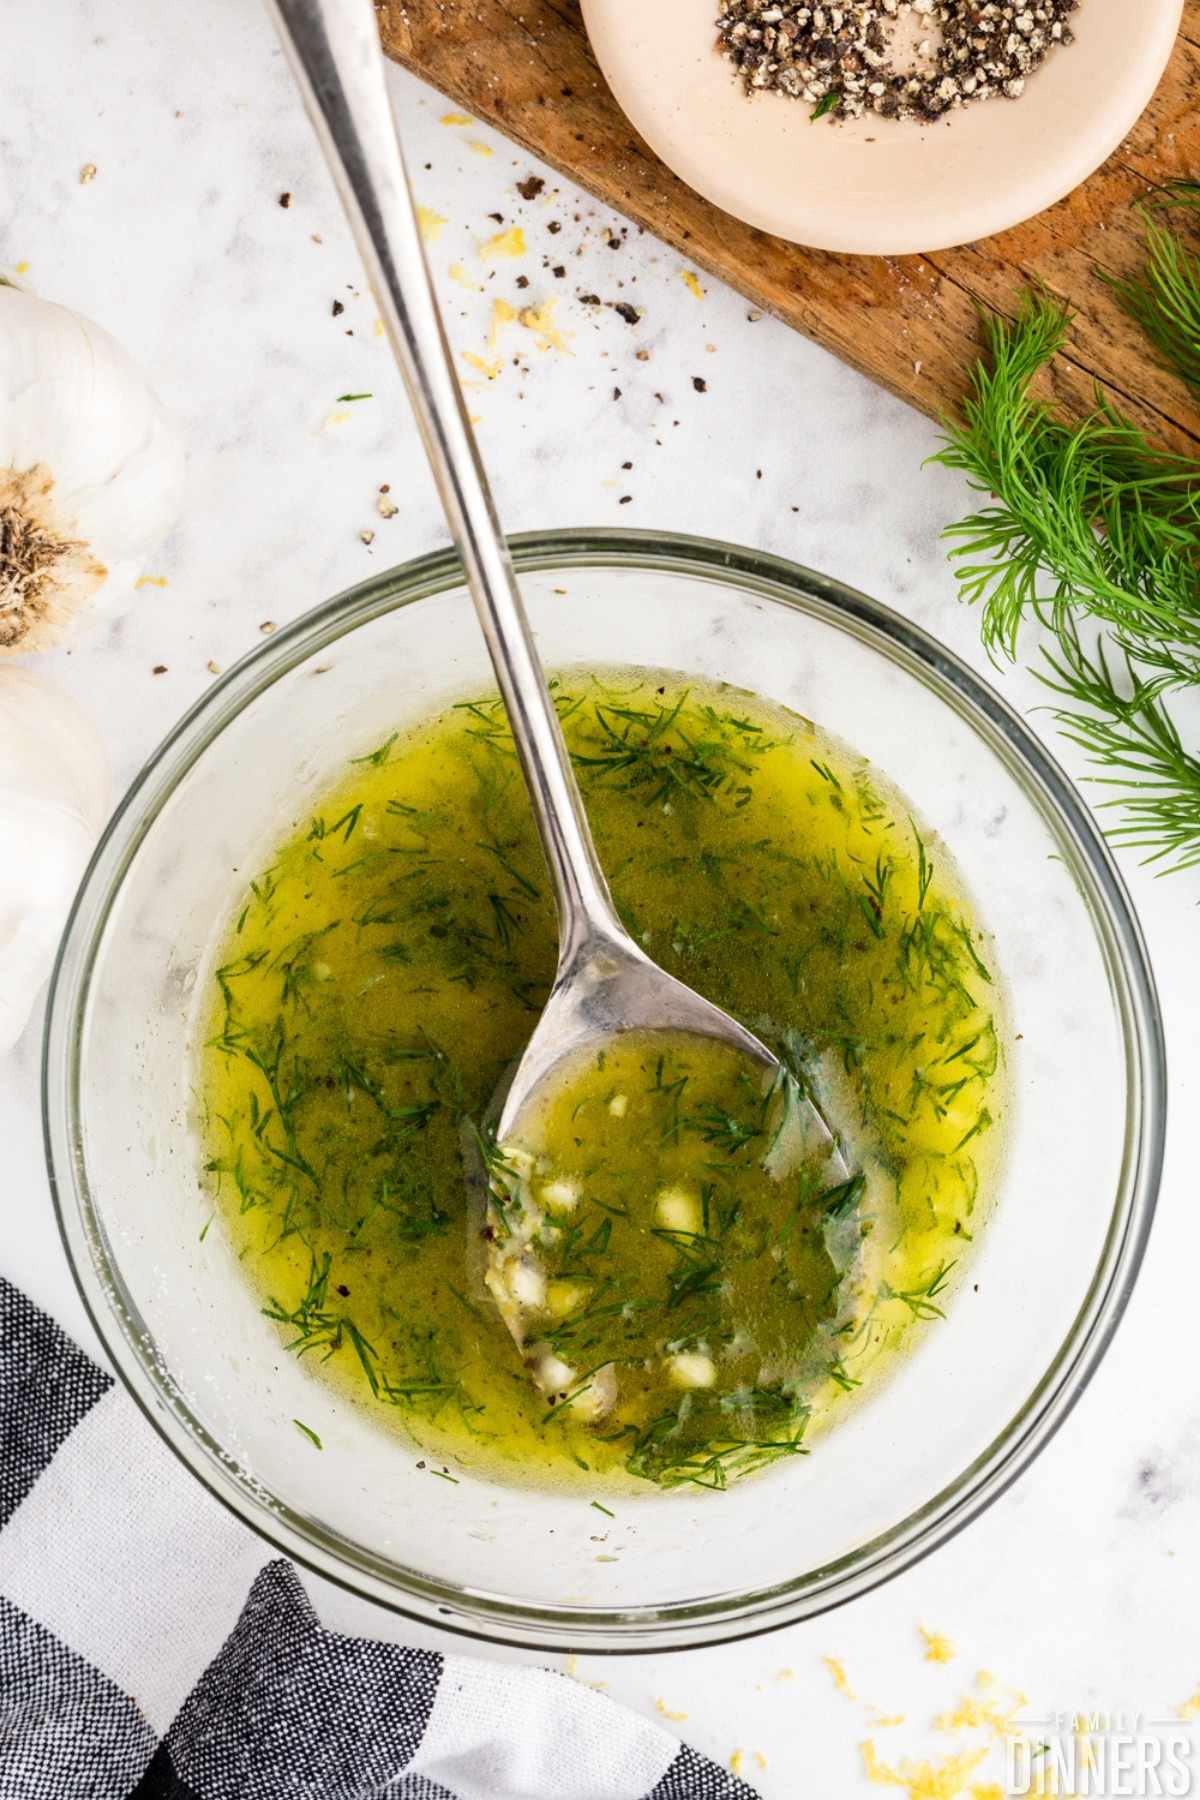 Lemon dill marinade in a glass bowl with a large silver spoon